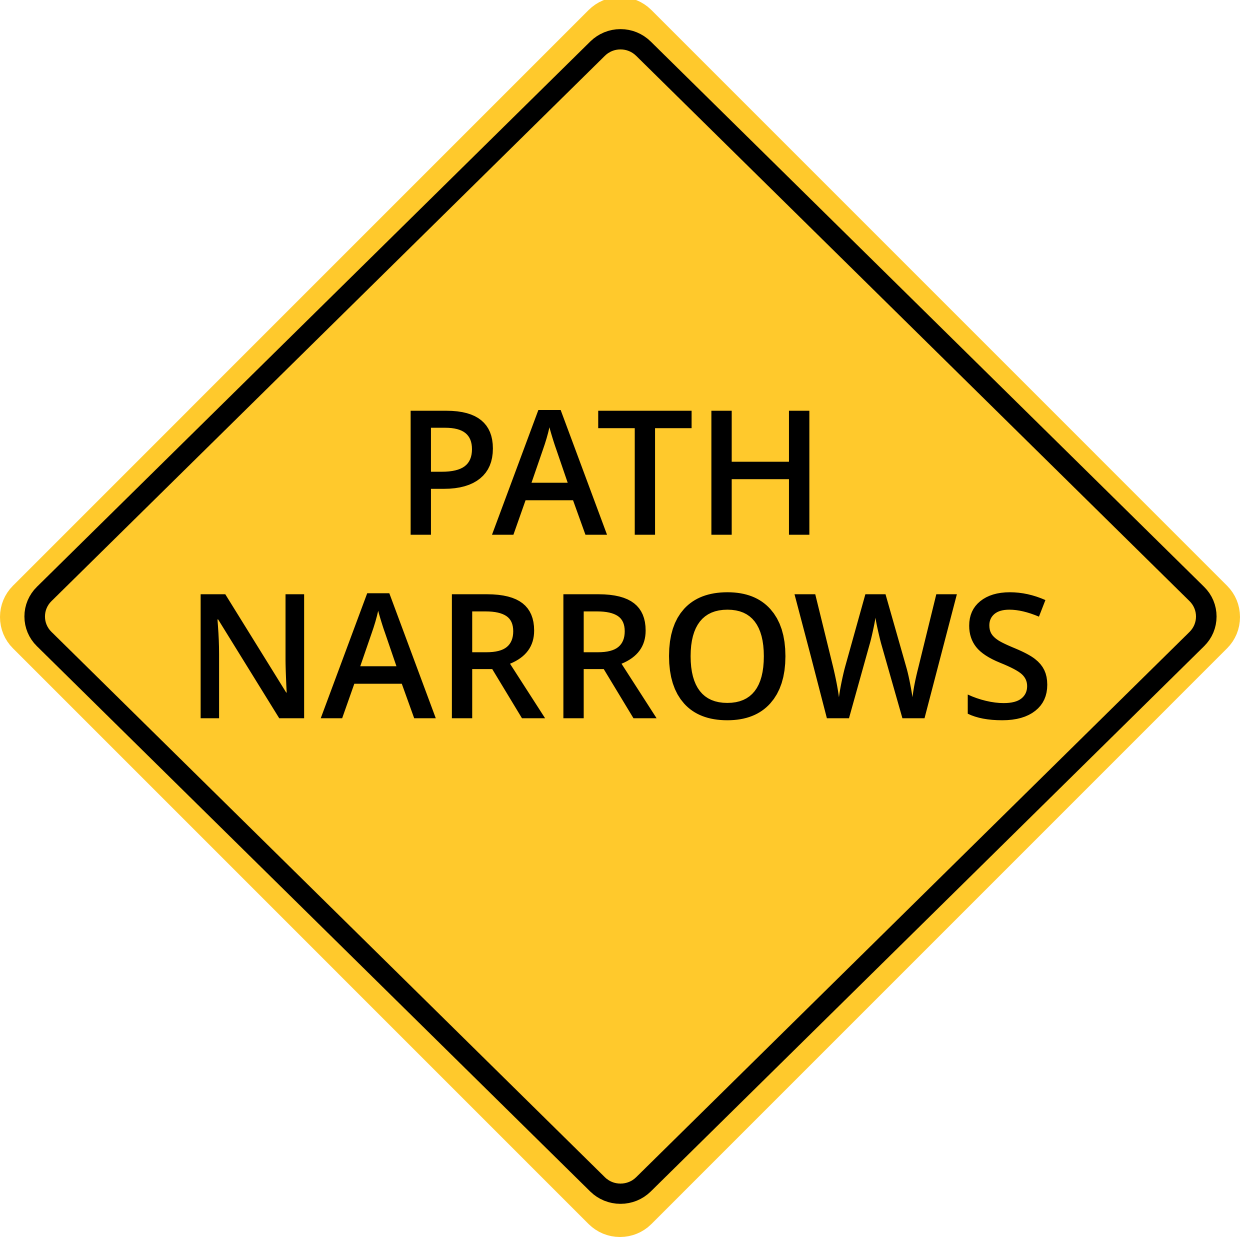 Path Narrows Yellow Diamond Warning Sign Template | Square Signs